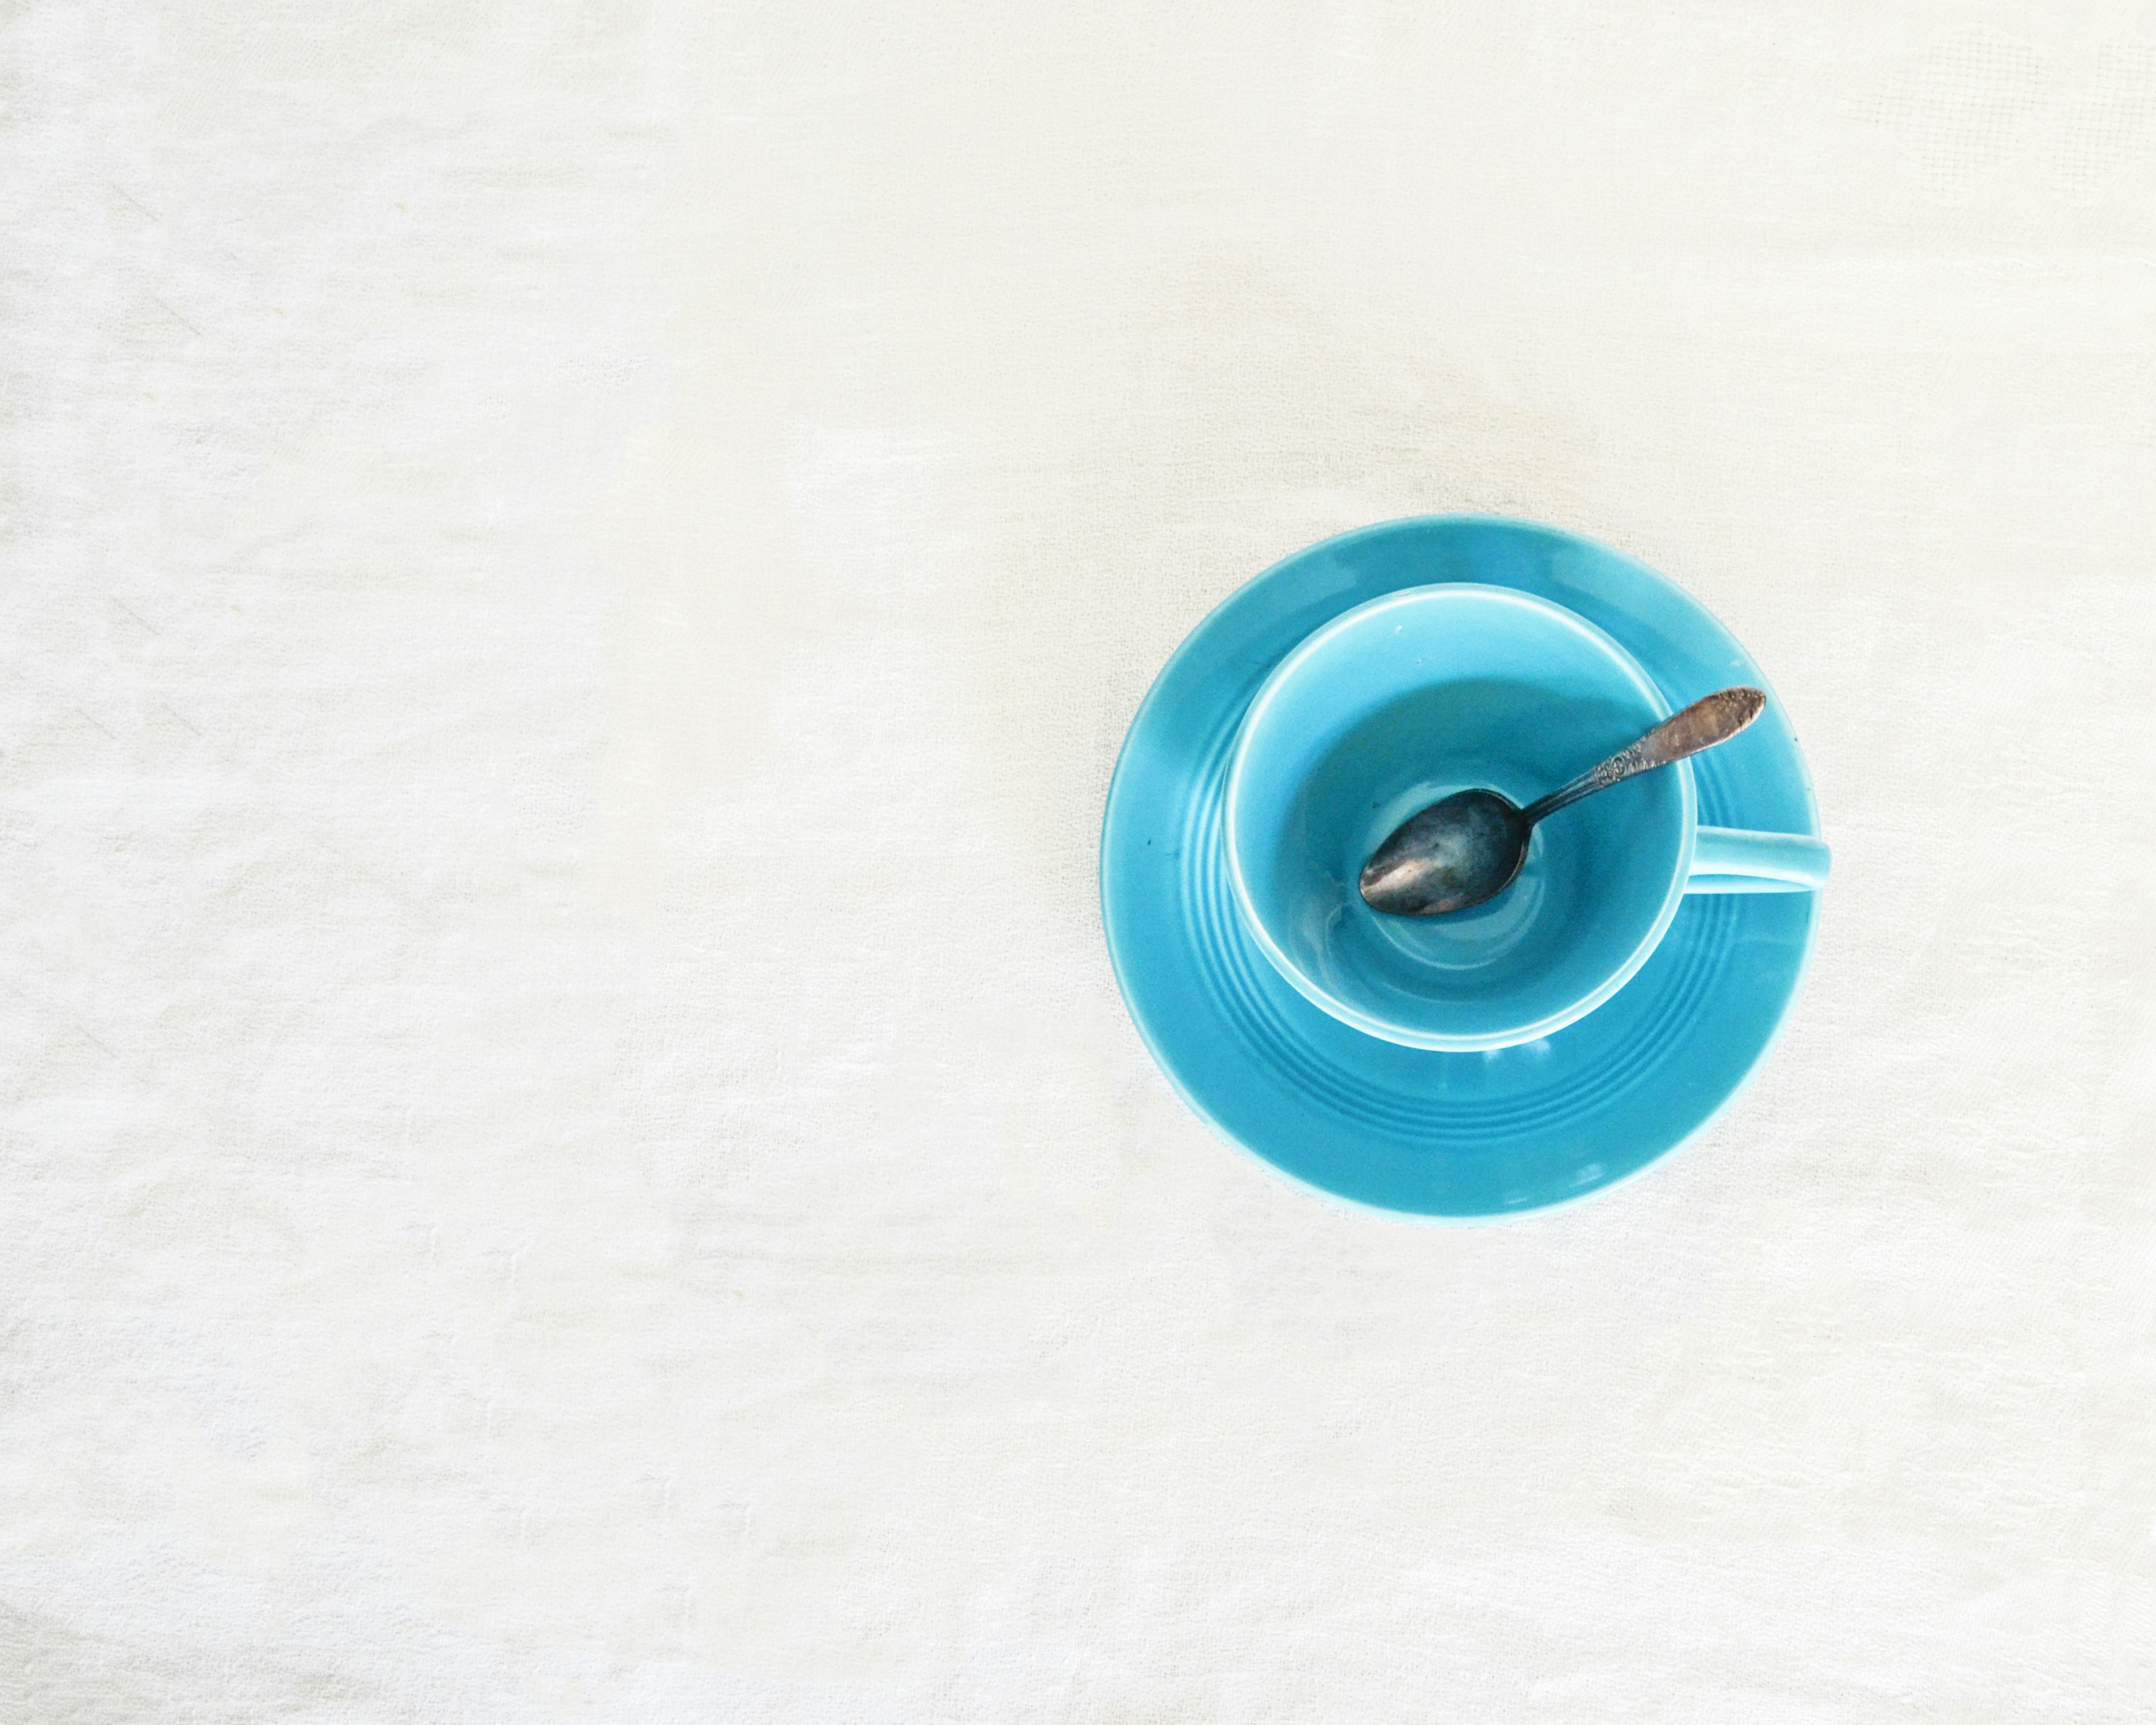 Small, empty blue cup with small spoon and saucer on a white-grey surface